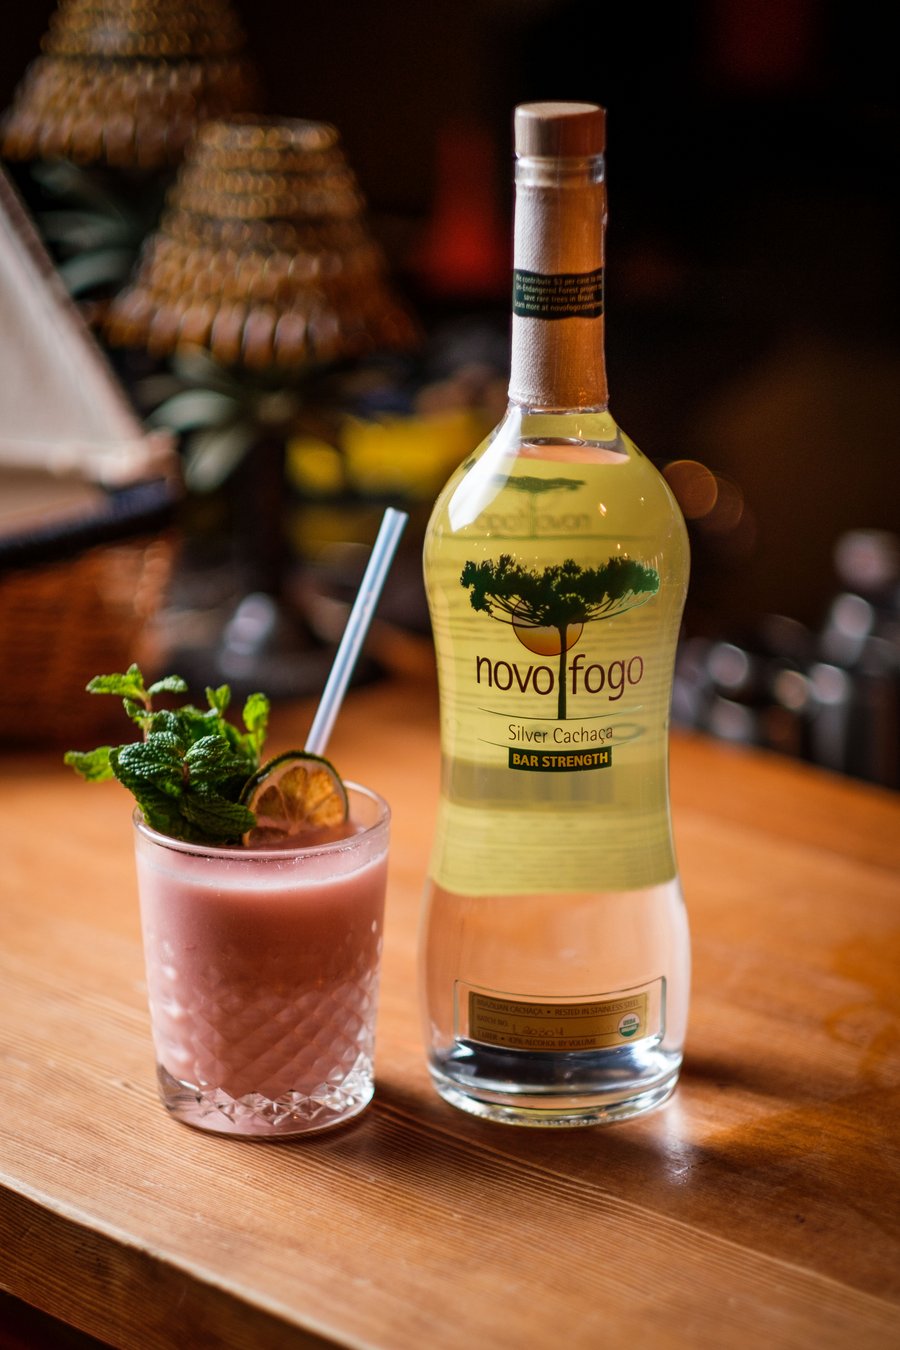 A Novo Fogo Bar Strength Silver Cachaca bottle sitting next to a pink cocktail!